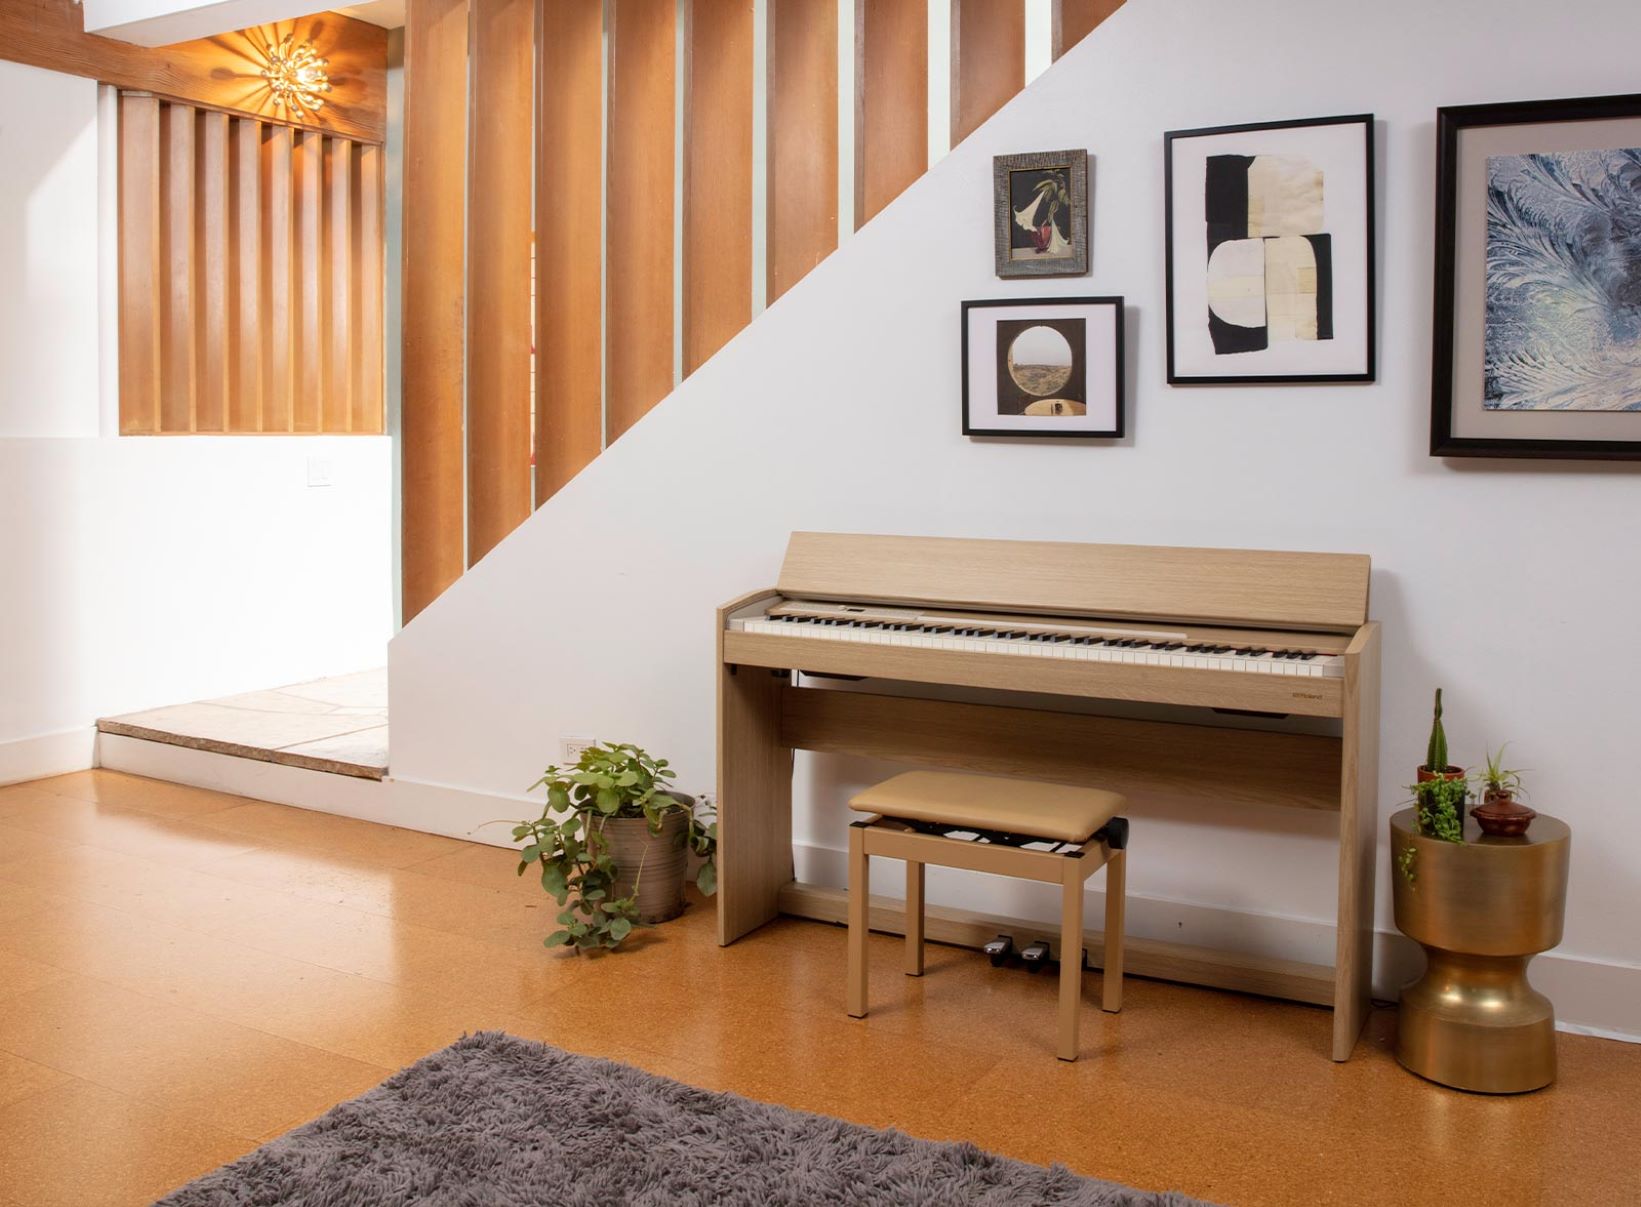 How To Decorate A Piano Top